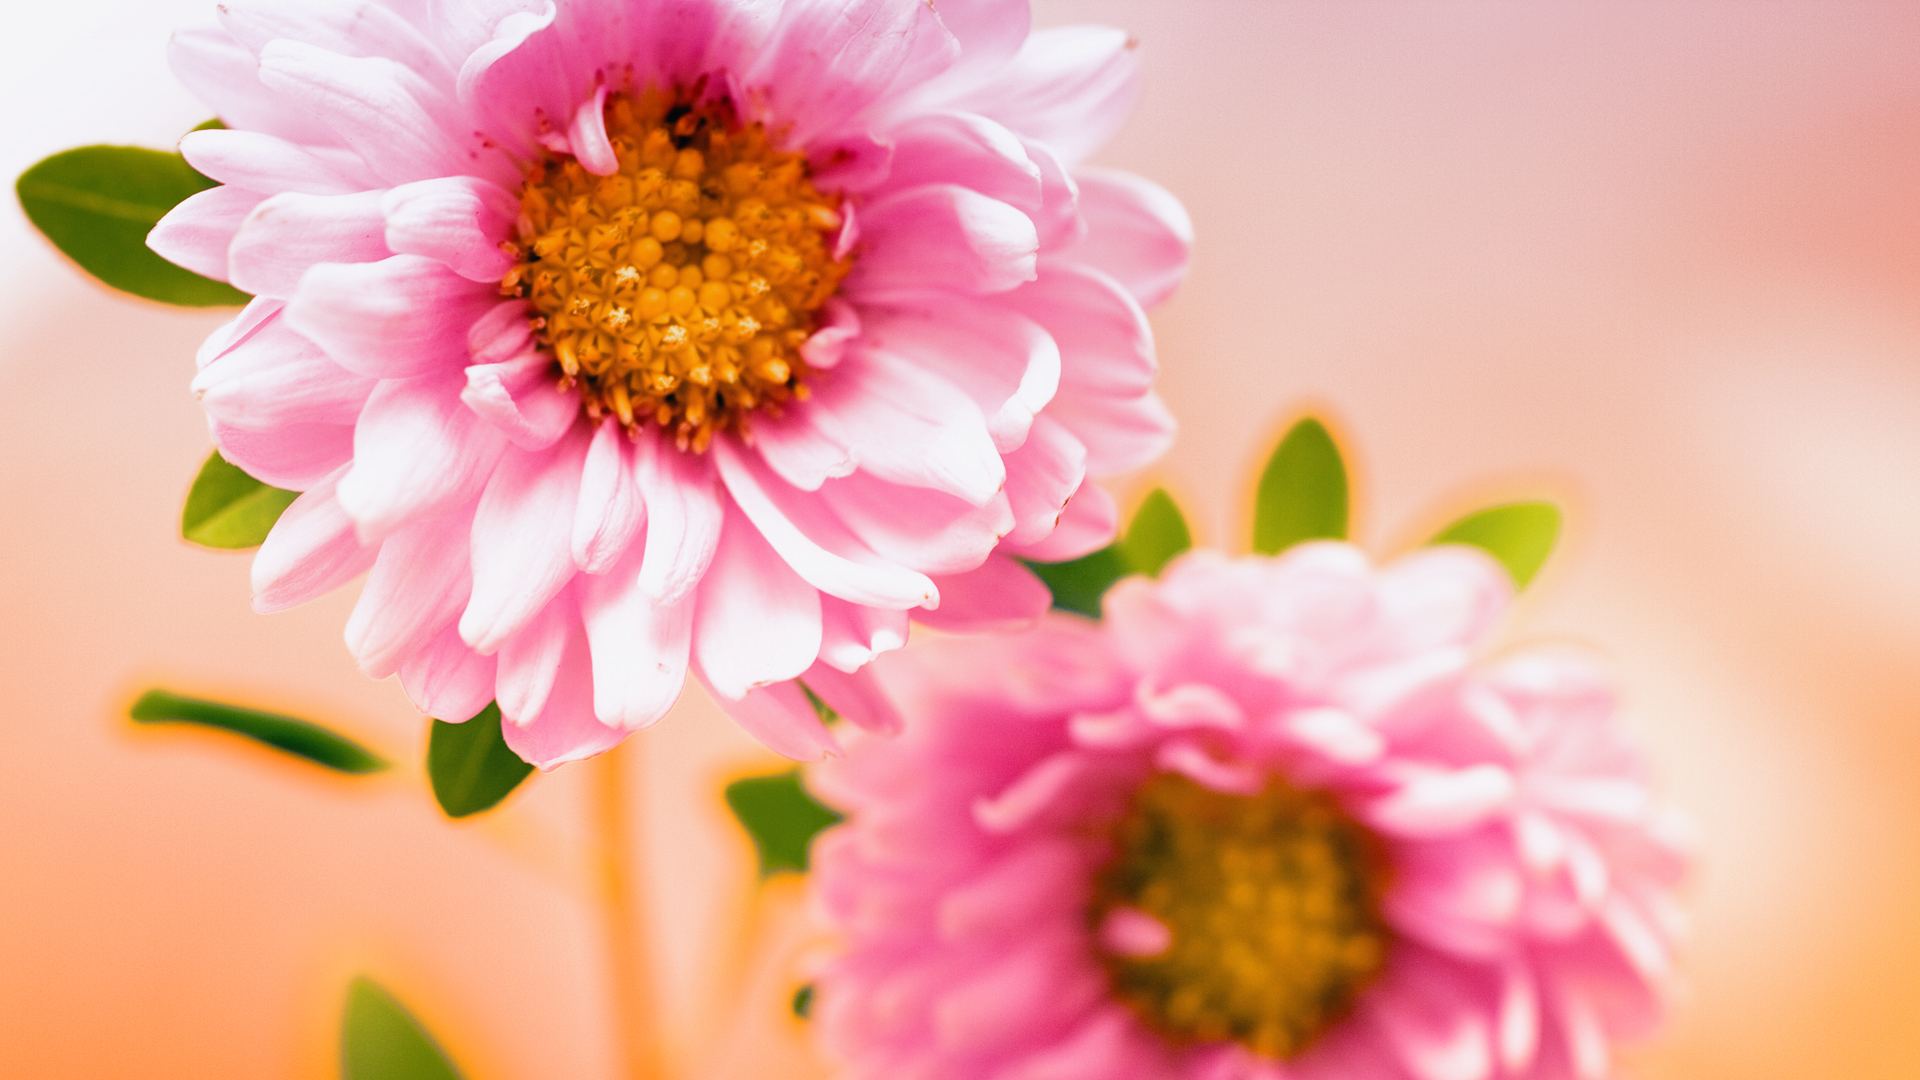  flowers hd flowers 1920x1080px file size 1 37 mb tags pink flowers hd